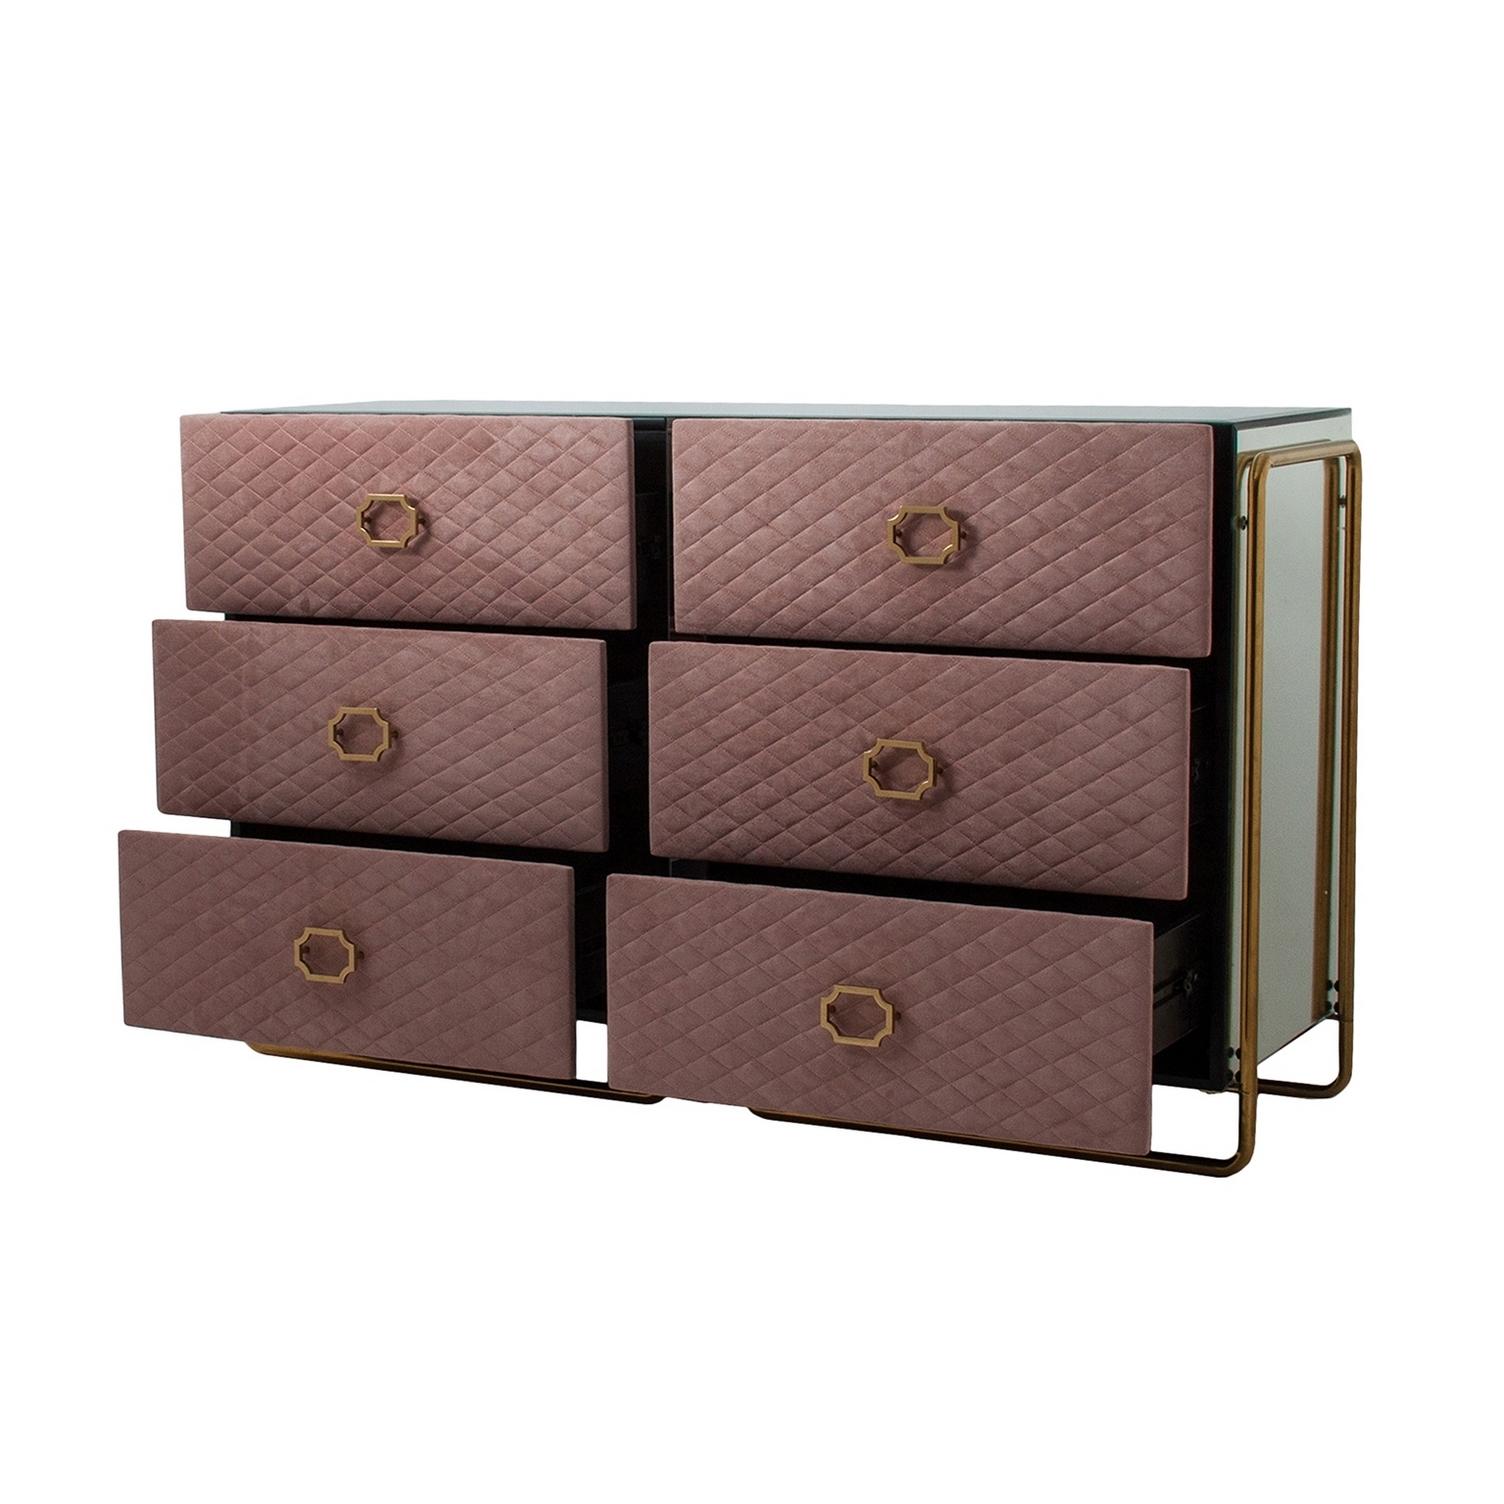 Mirrored and gilded metal finish with powdery pink fabric large chest of drawers.